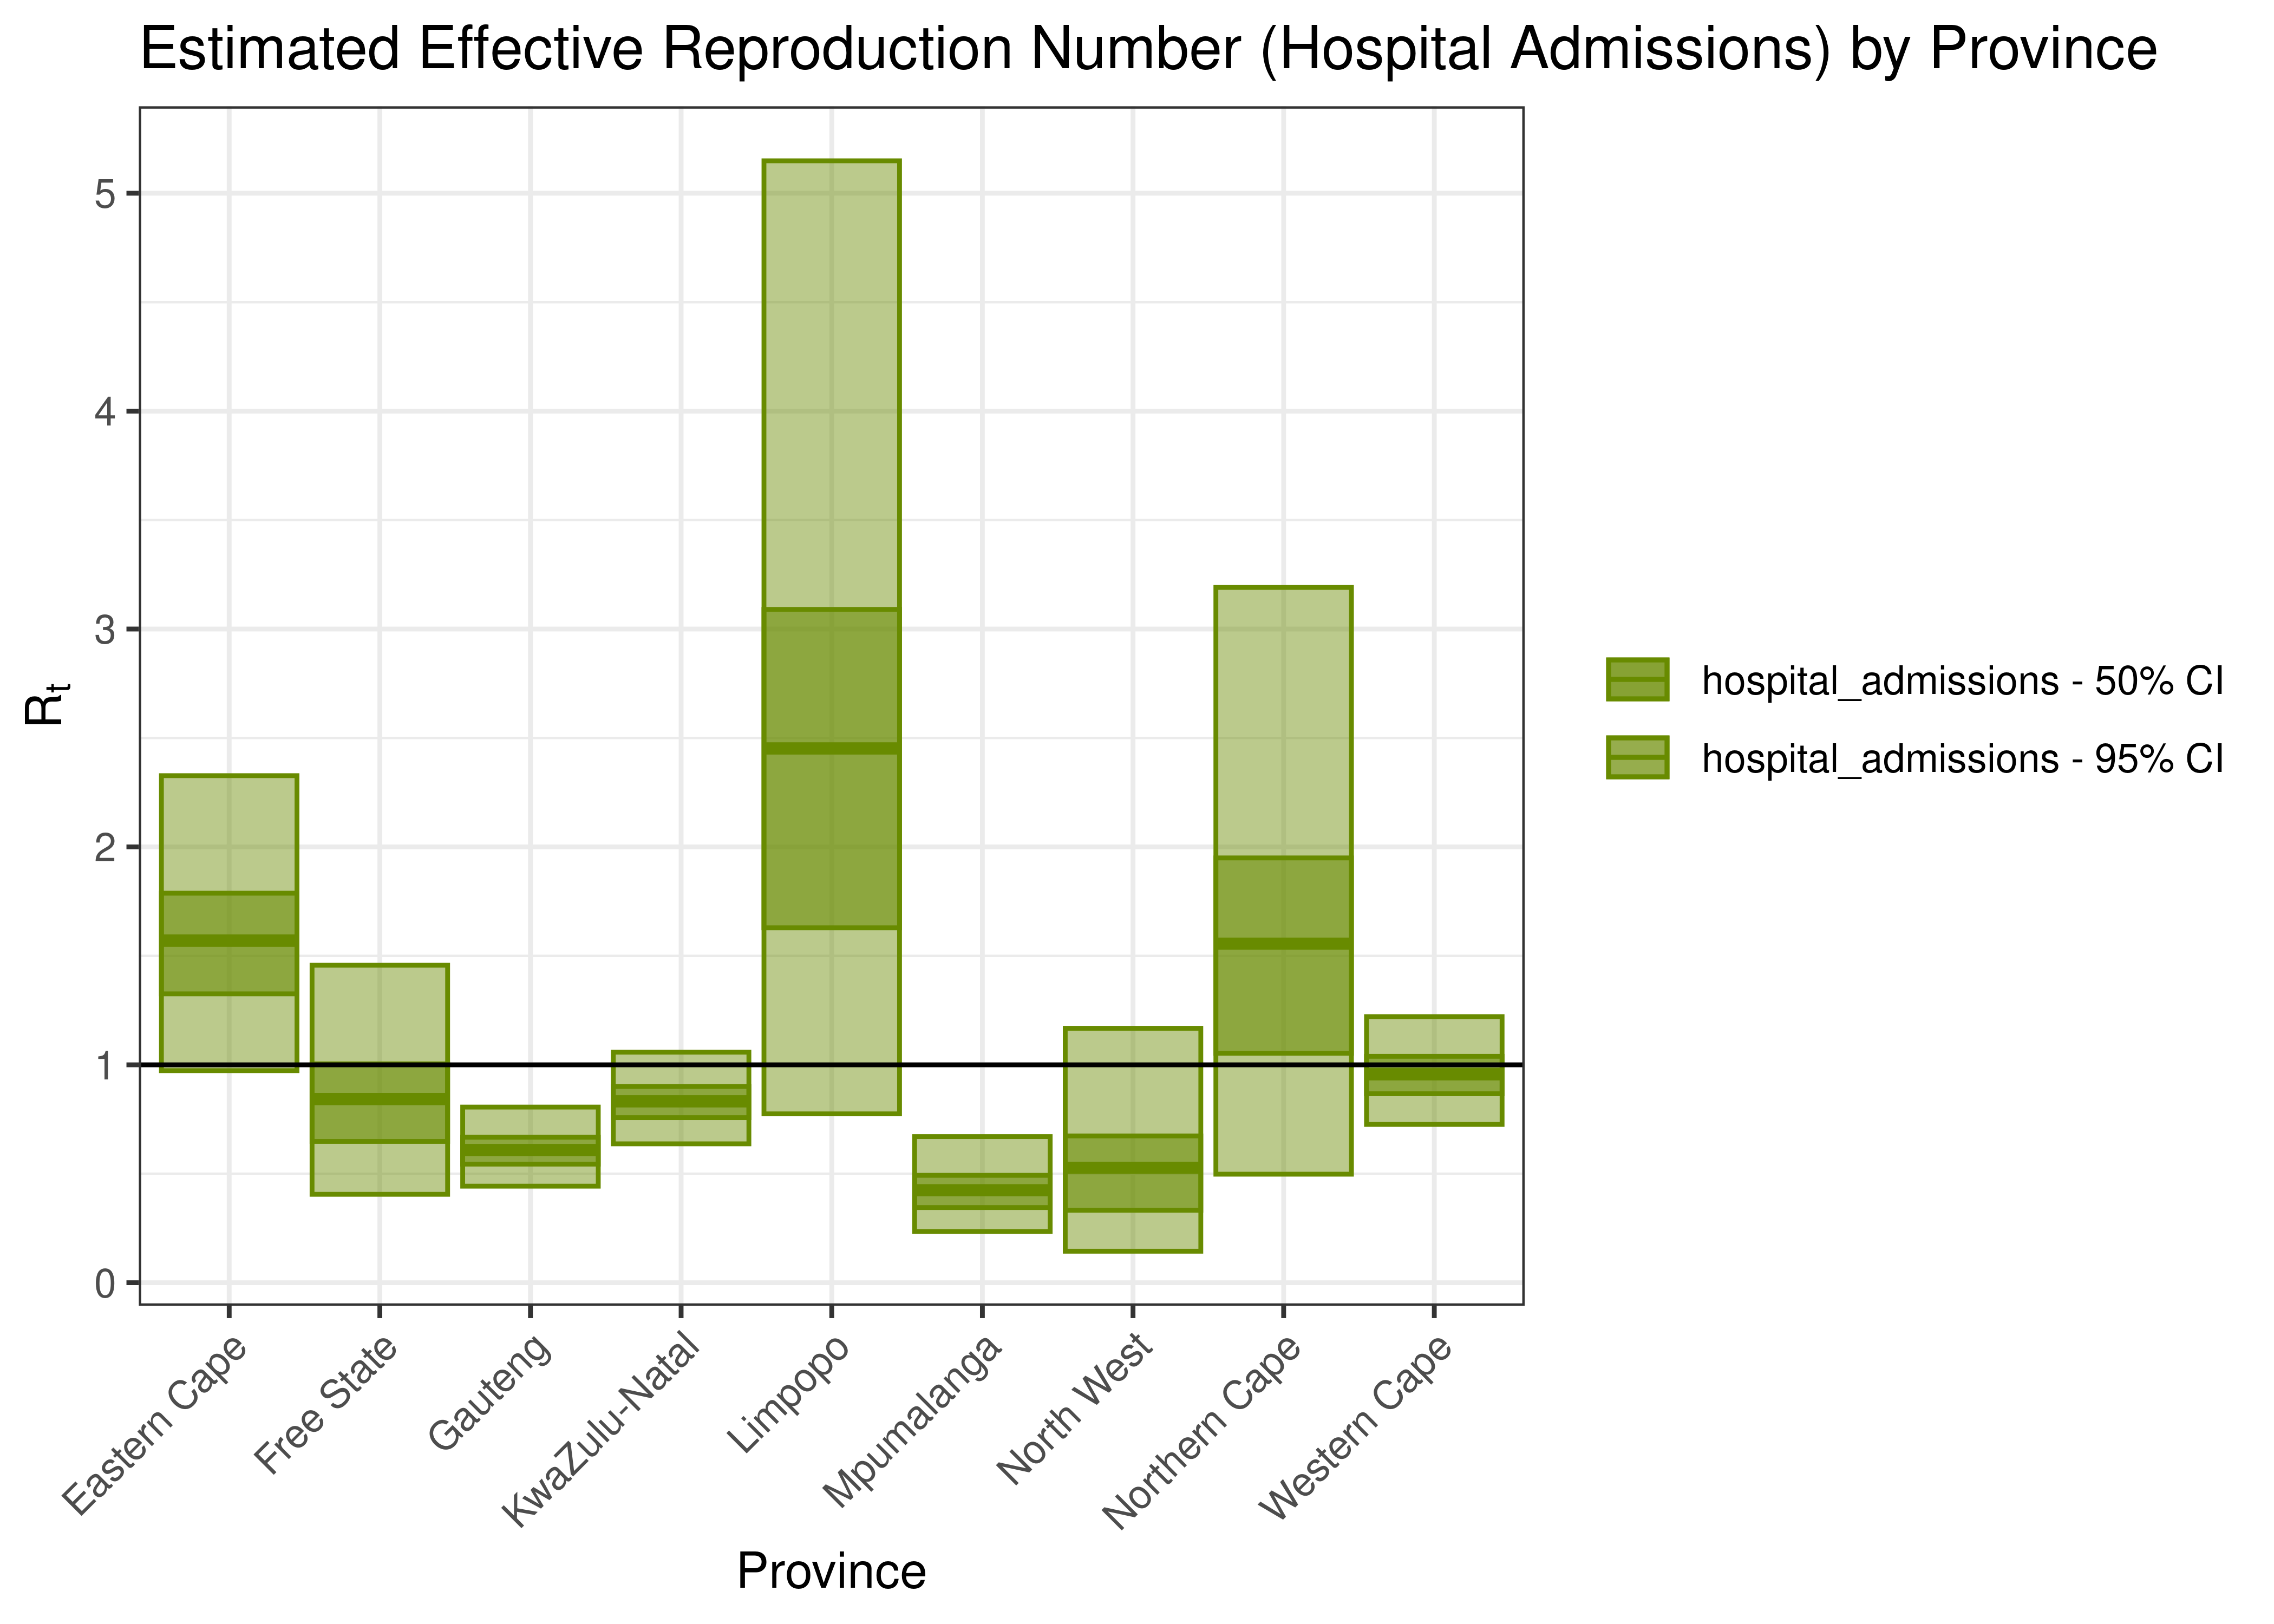 Estimated Effective Reproduction Number based on Hospital Admissions by Province